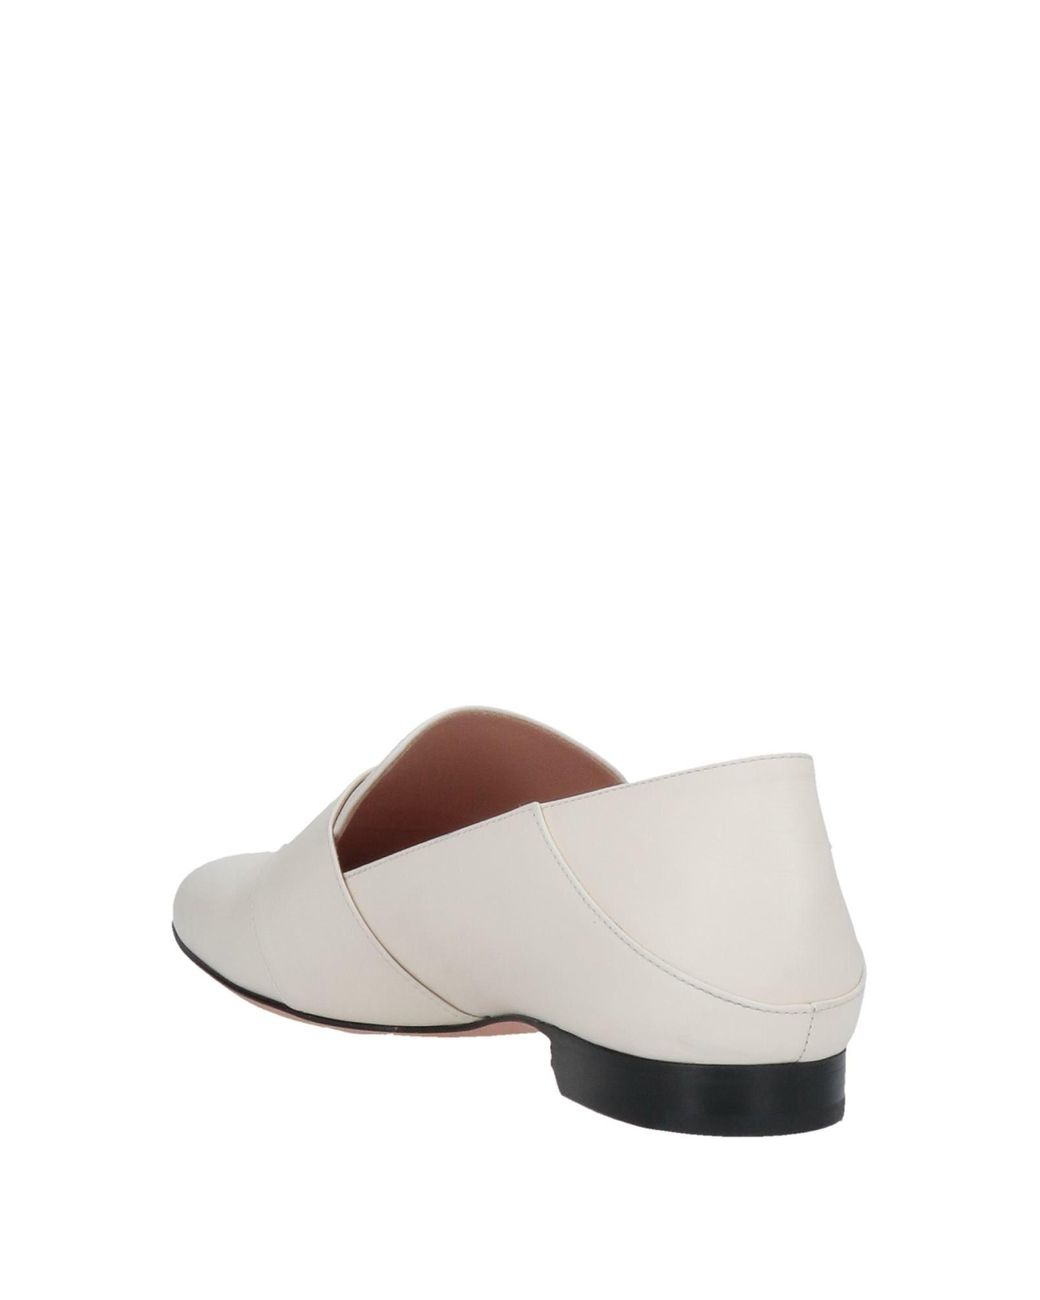 Bally Leather Loafer in Ivory (White) - Lyst